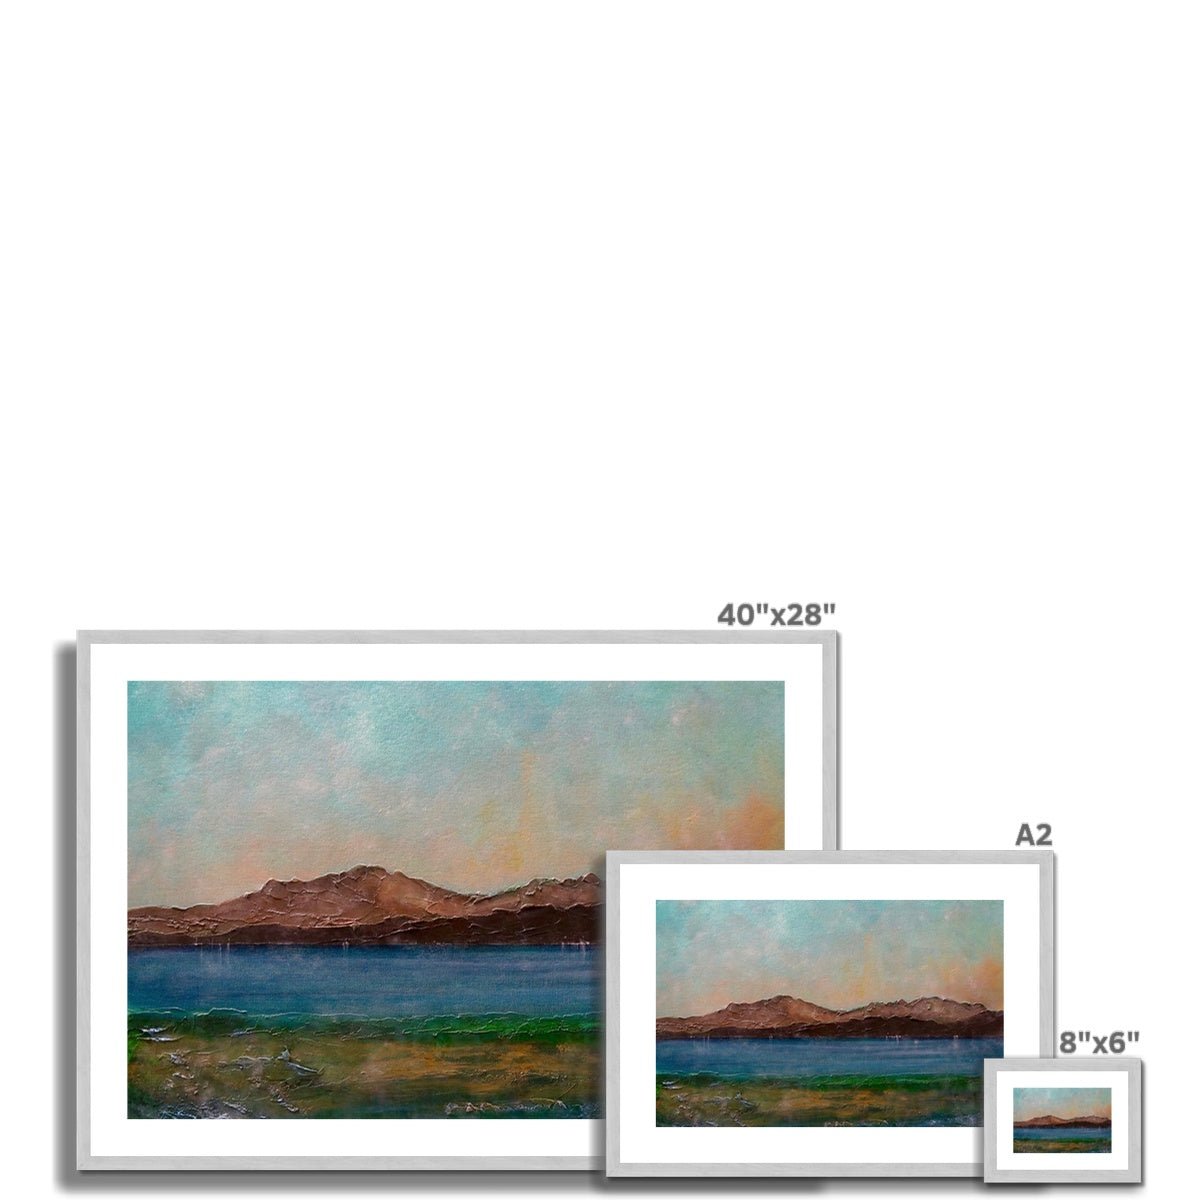 Arran From Scalpsie Bay Painting | Antique Framed & Mounted Prints From Scotland-Antique Framed & Mounted Prints-Arran Art Gallery-Paintings, Prints, Homeware, Art Gifts From Scotland By Scottish Artist Kevin Hunter